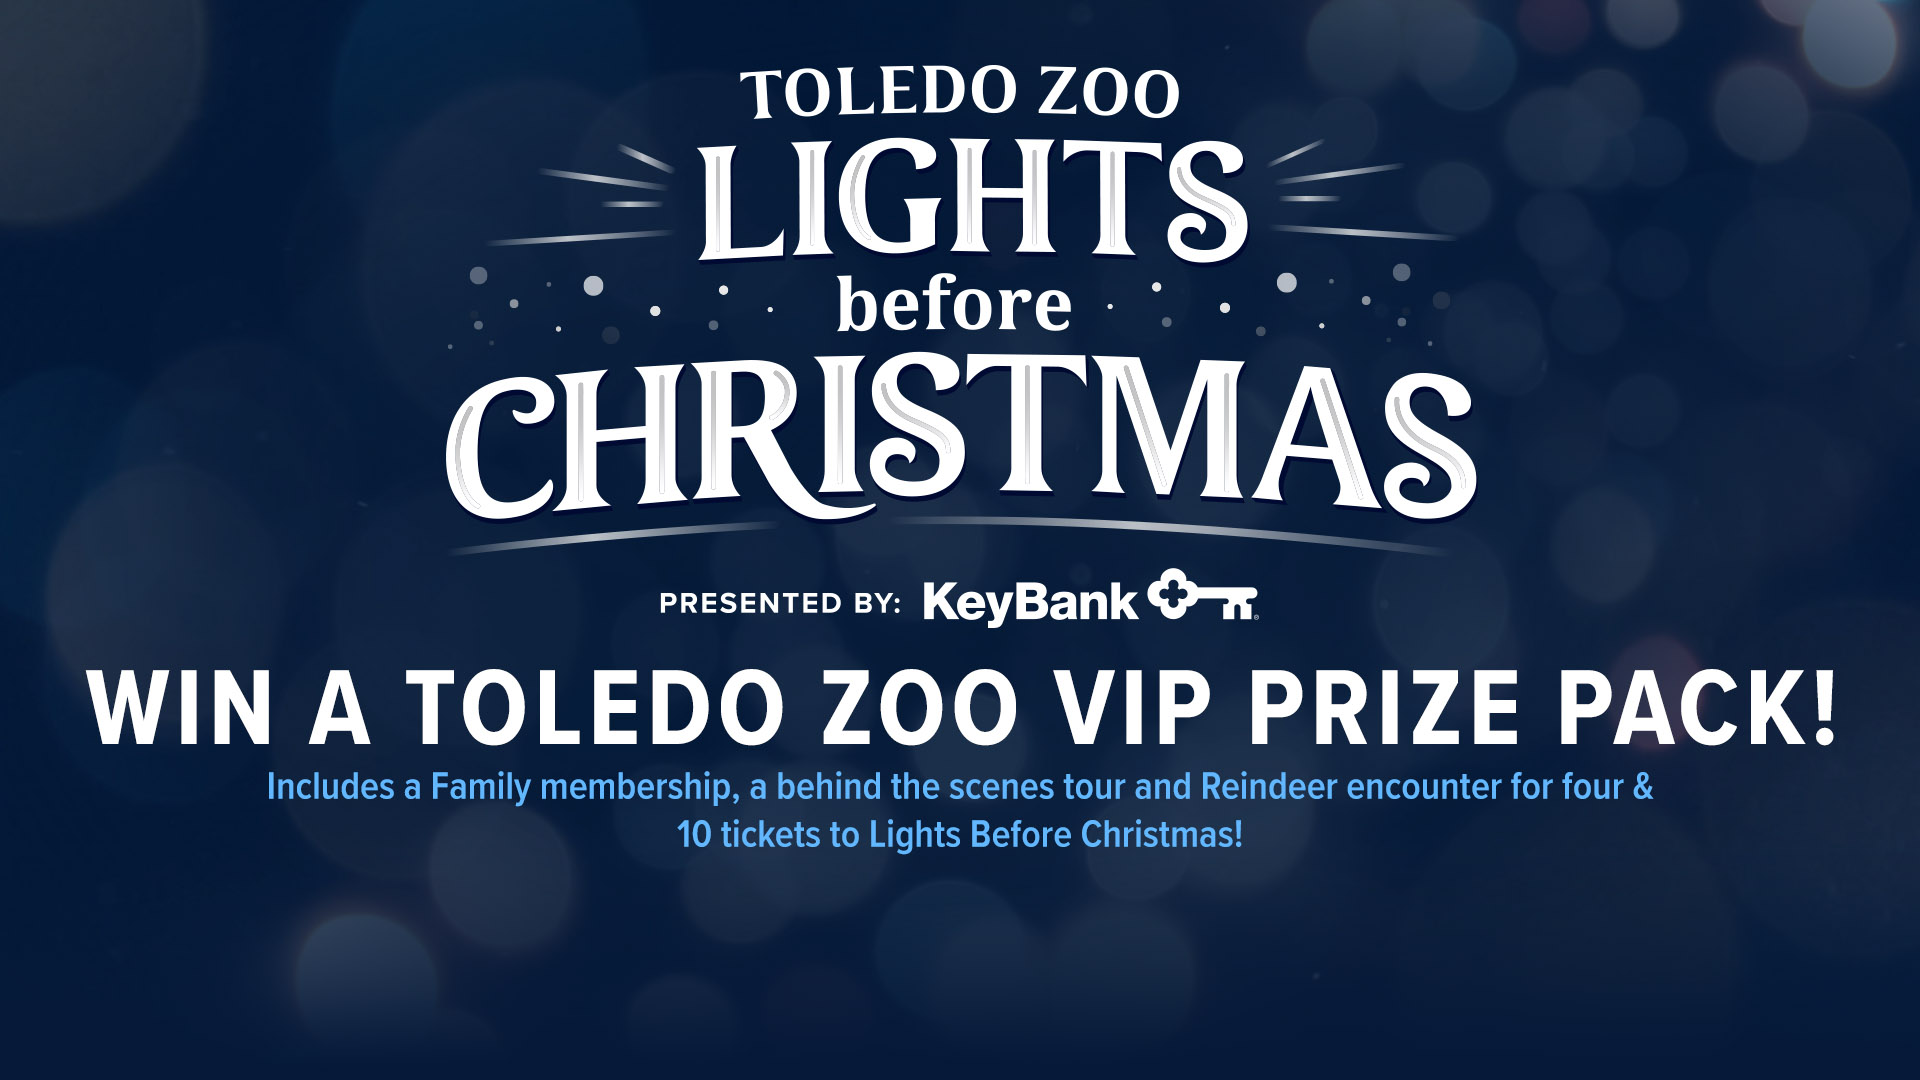 Win a Toledo Zoo VIP Prize Pack!